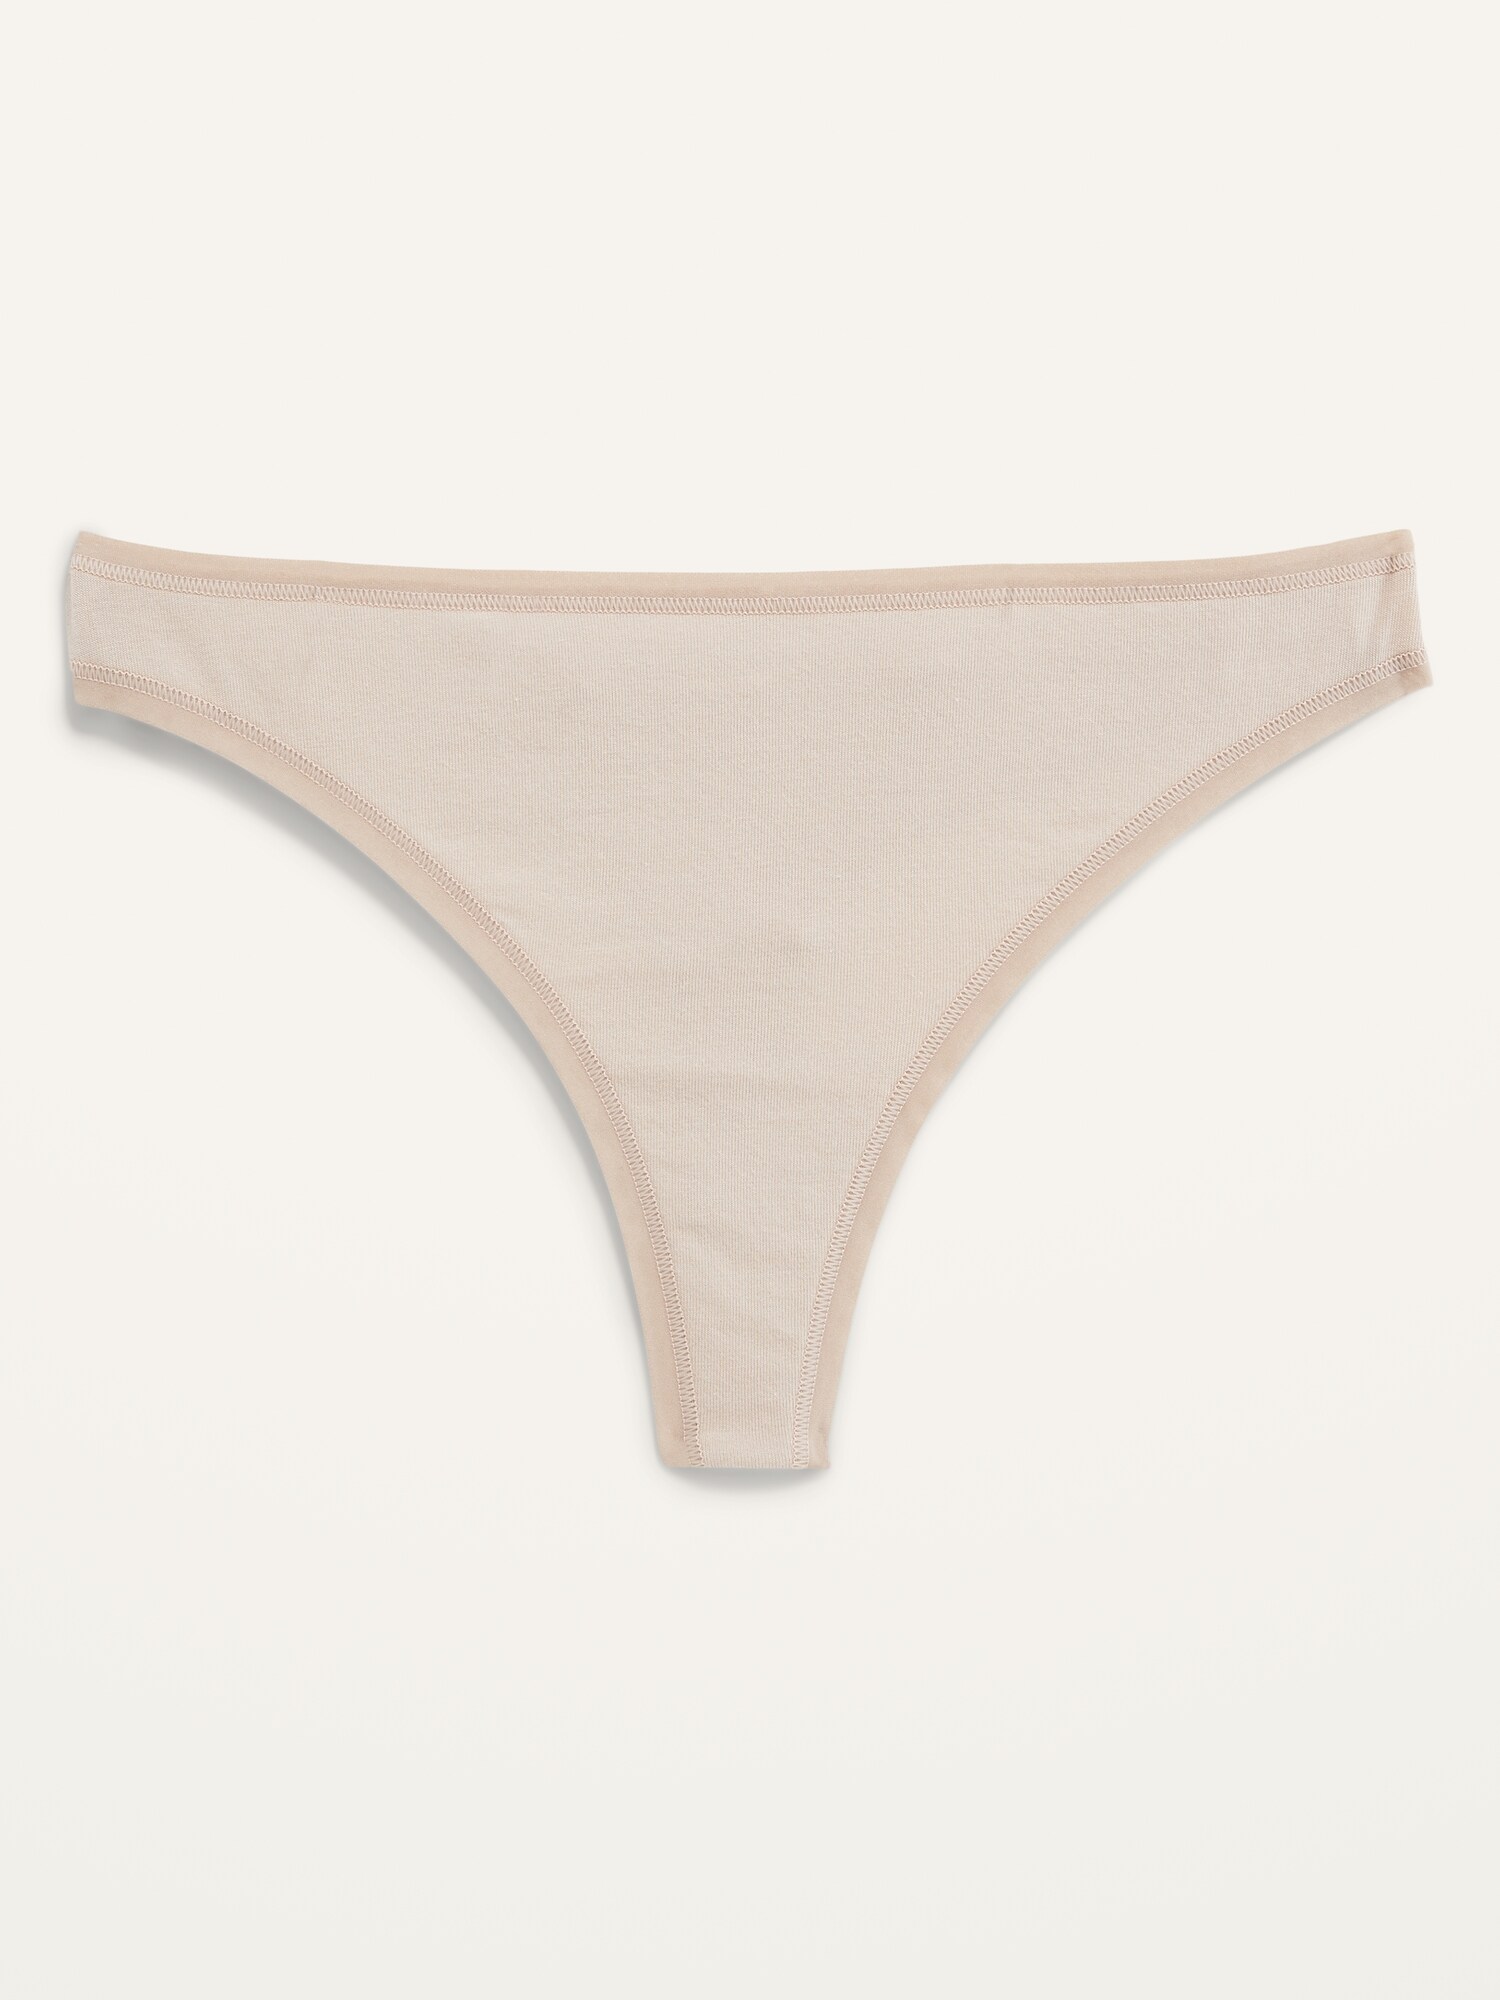 M & S Taille 6 Taille Basse String modal coton mélangé Knickers Culotte Rose 